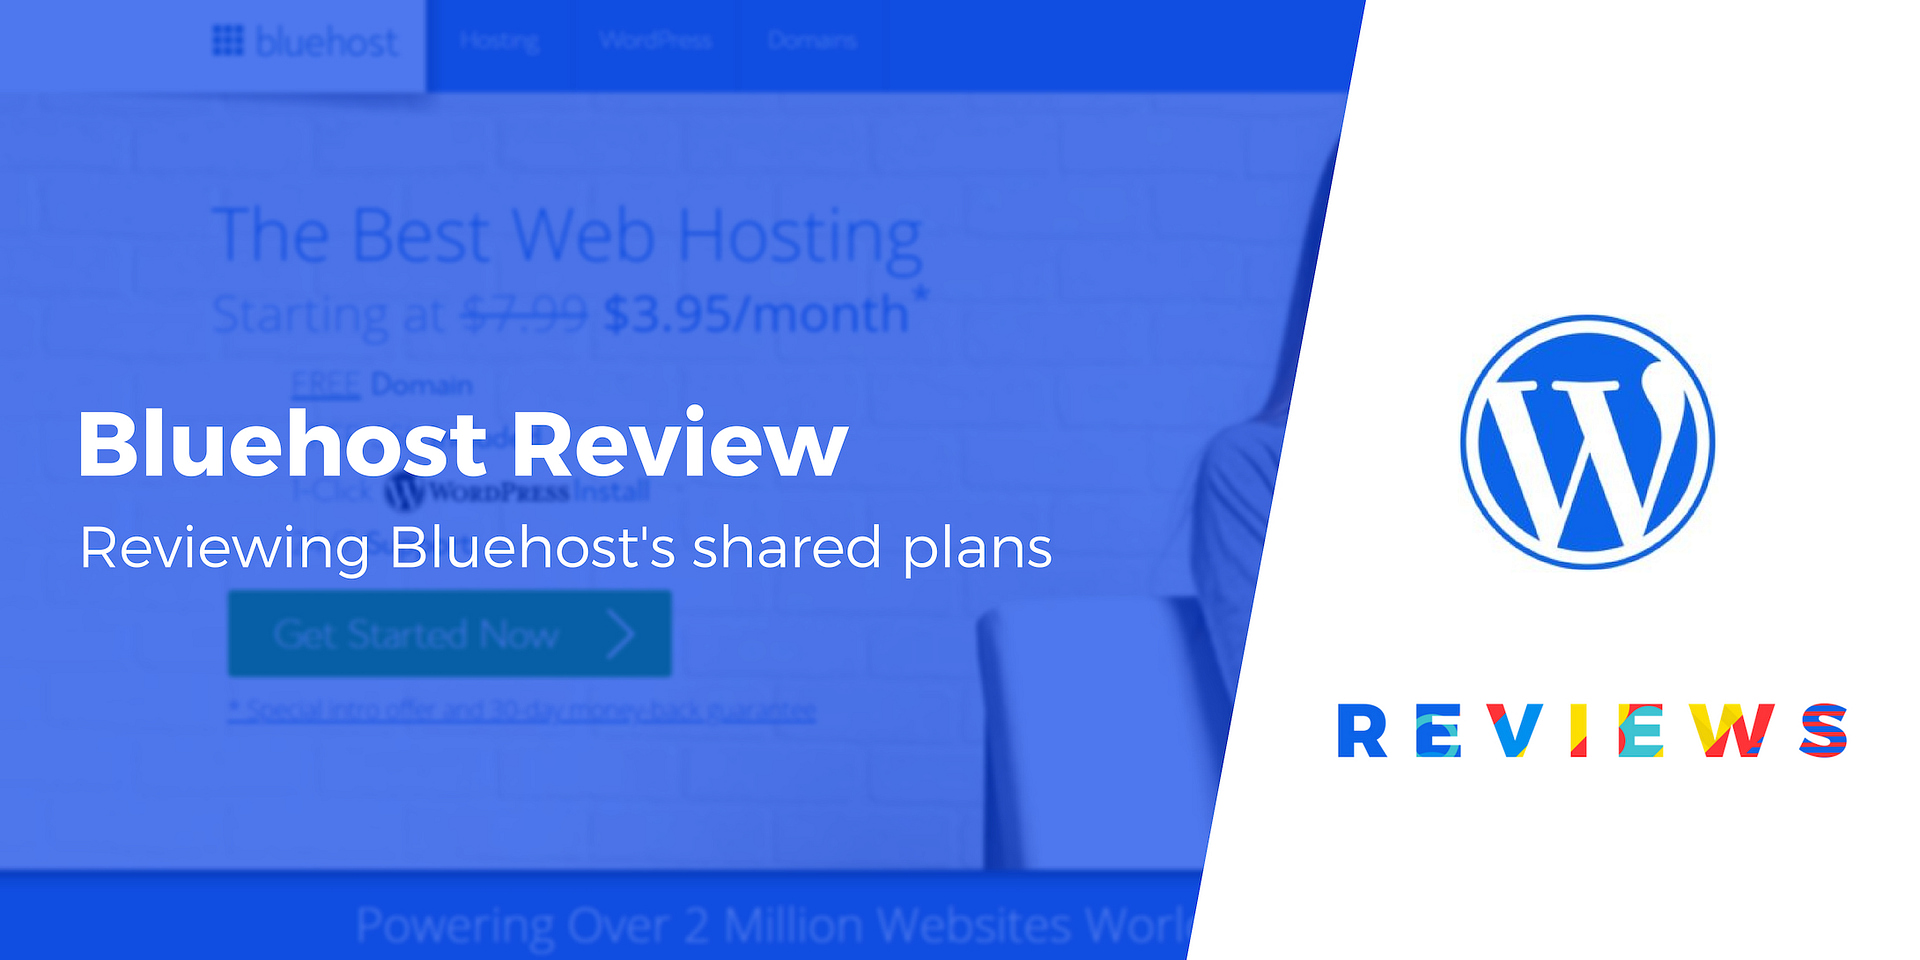 Bluehost Review For Wordpress Based On Real Tests And Survey Images, Photos, Reviews